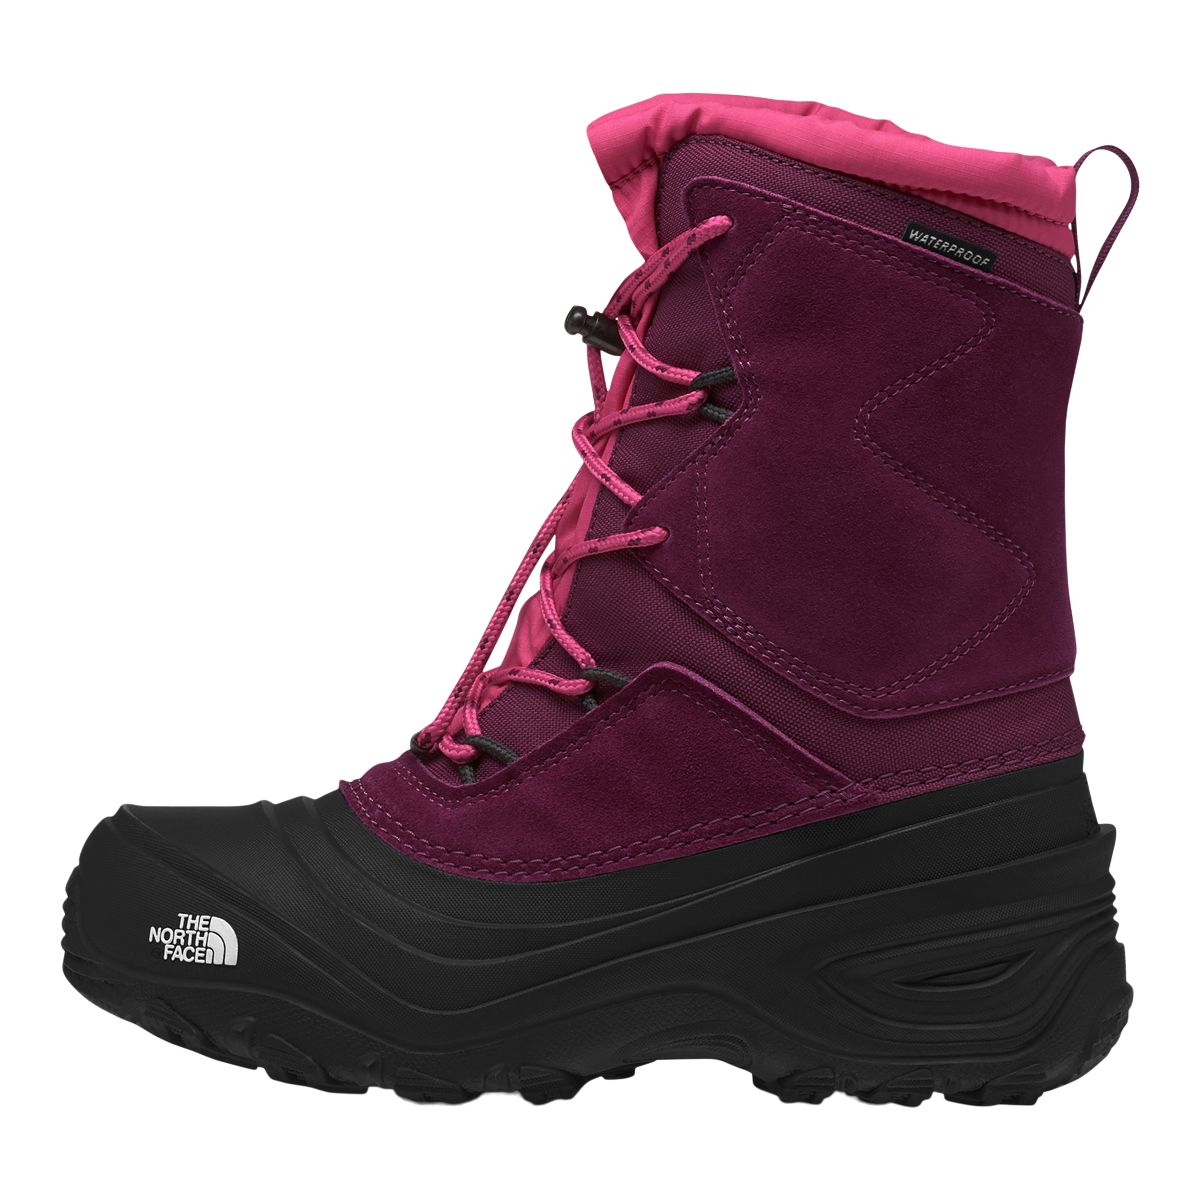 Image of The North Face Kids' Alpenglow V Waterproof Insulated Lightweight Winter Boots